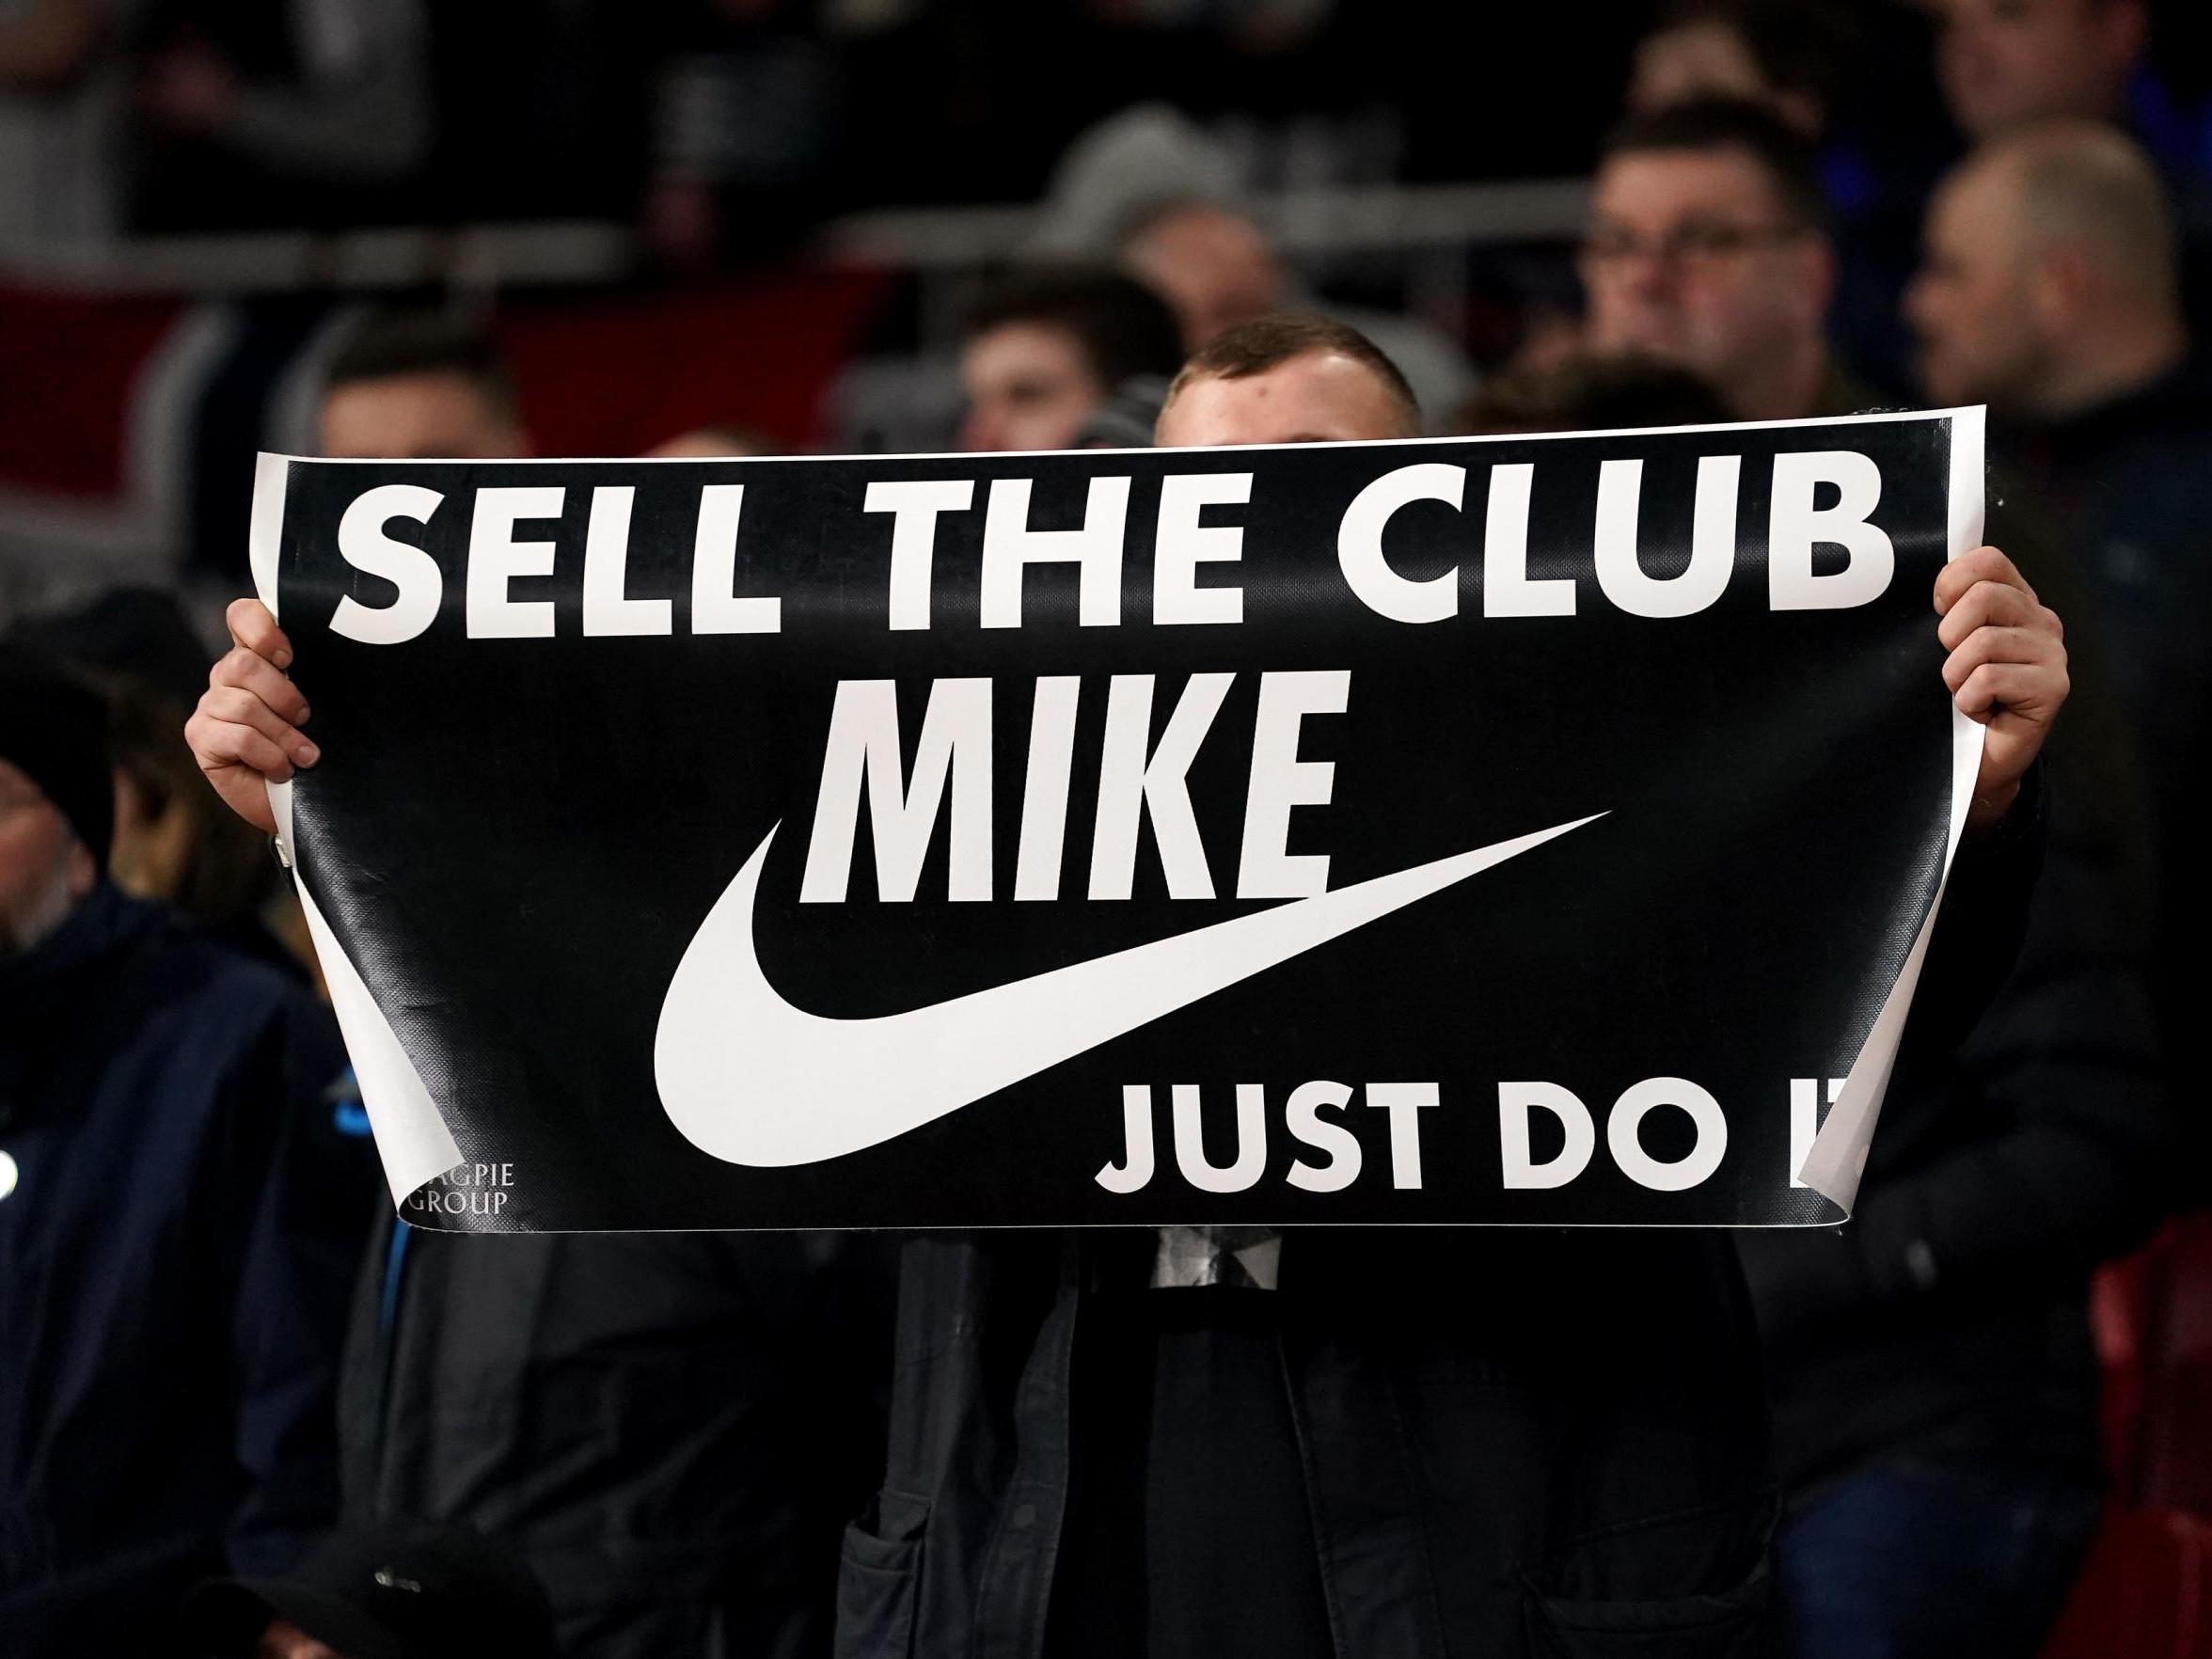 Newcastle fans have long hoped for a takeover